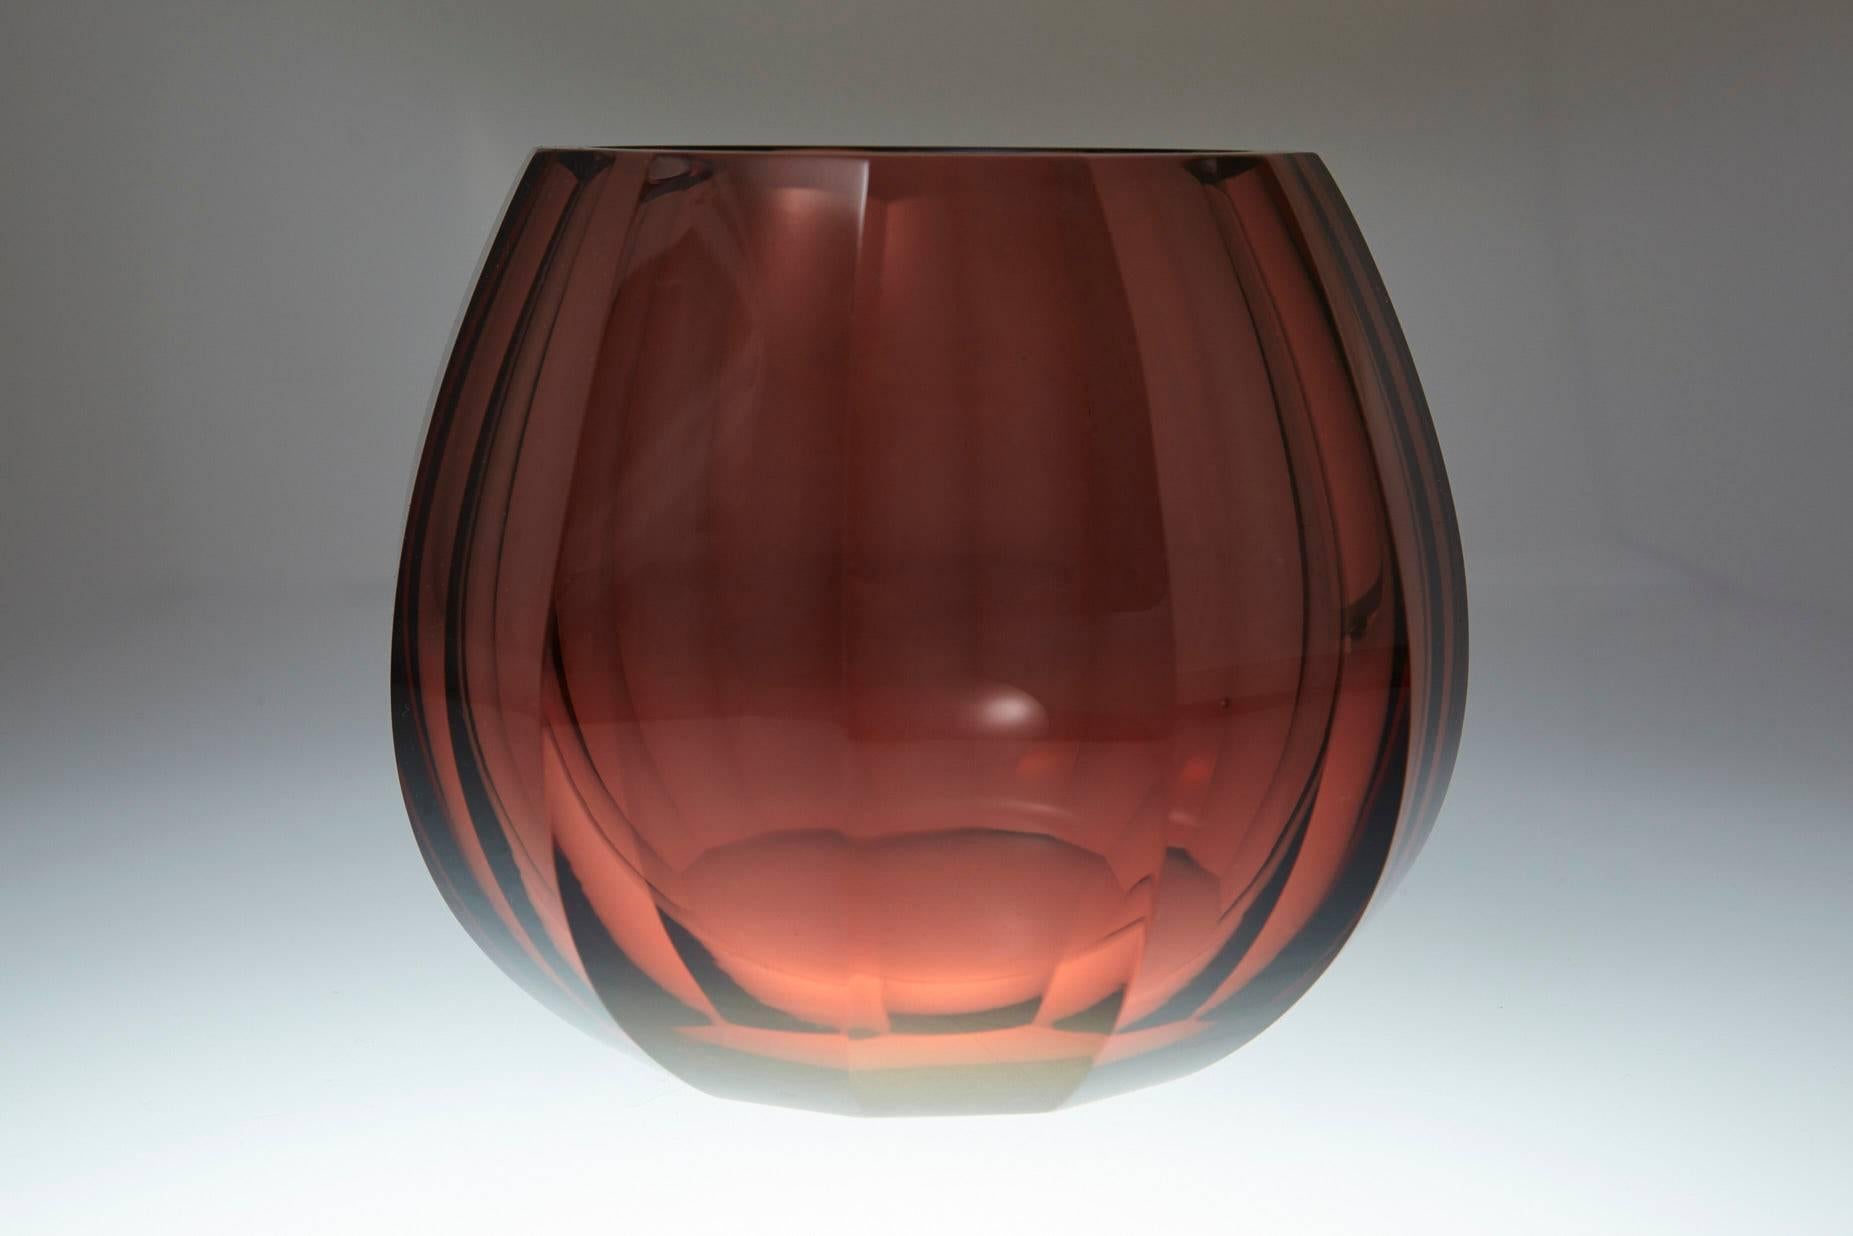 Amber hand-cut and hand polished crystal vase. The piece is firmly attributed to Josef Hoffmann for Moser & Söhne, and signed Moser, circa 1920s.
The vase is in very good condition, no chips or fleabites on the cut edges, no repairs, one minor chip